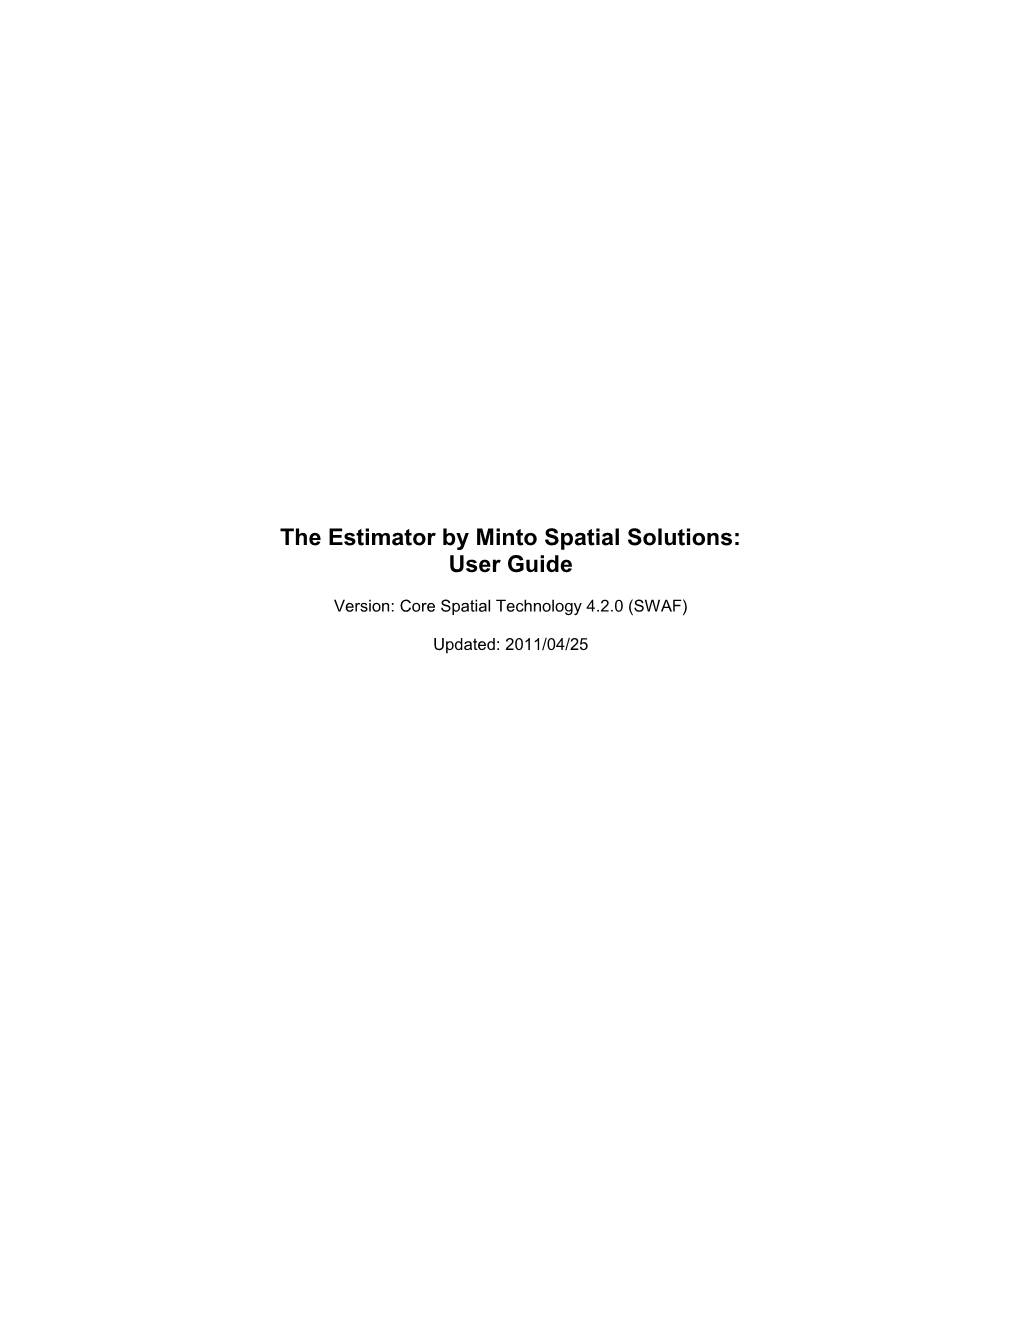 The Estimator by Minto Spatial Solutions